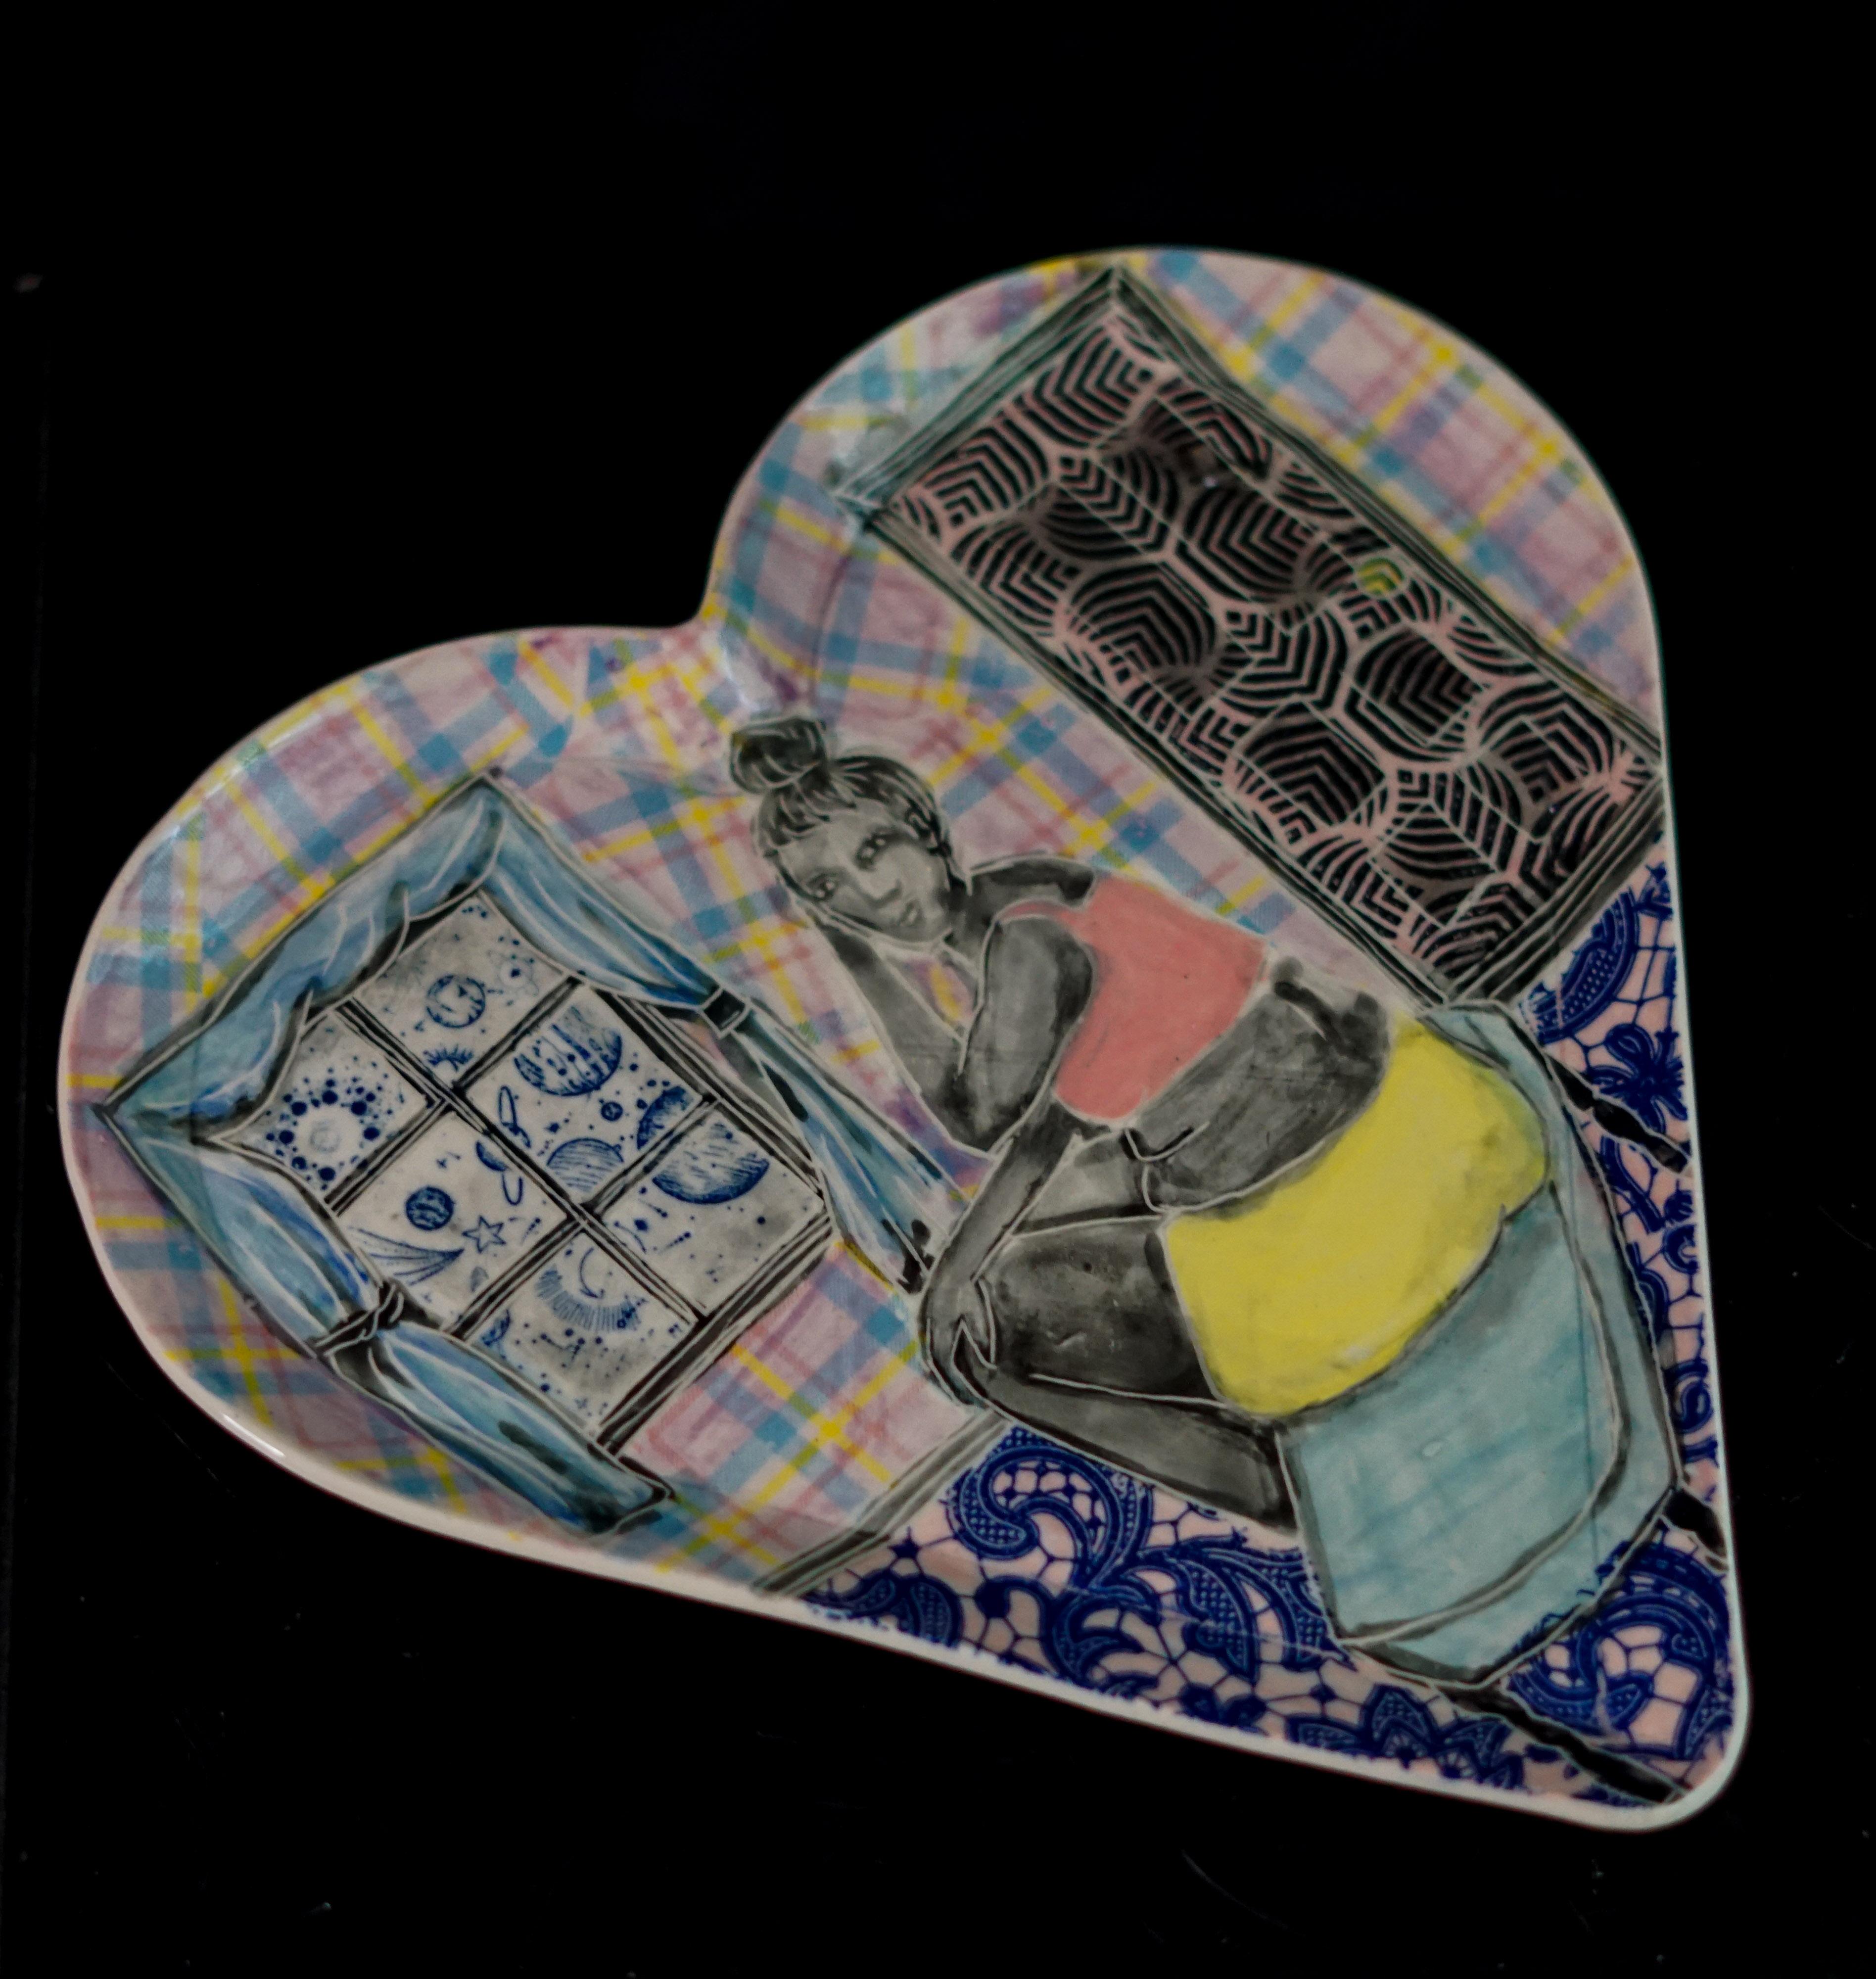 Getting at the Heart of the Matter, Hand built sculpture plate with sgraffito - Sculpture by Alex Hodge